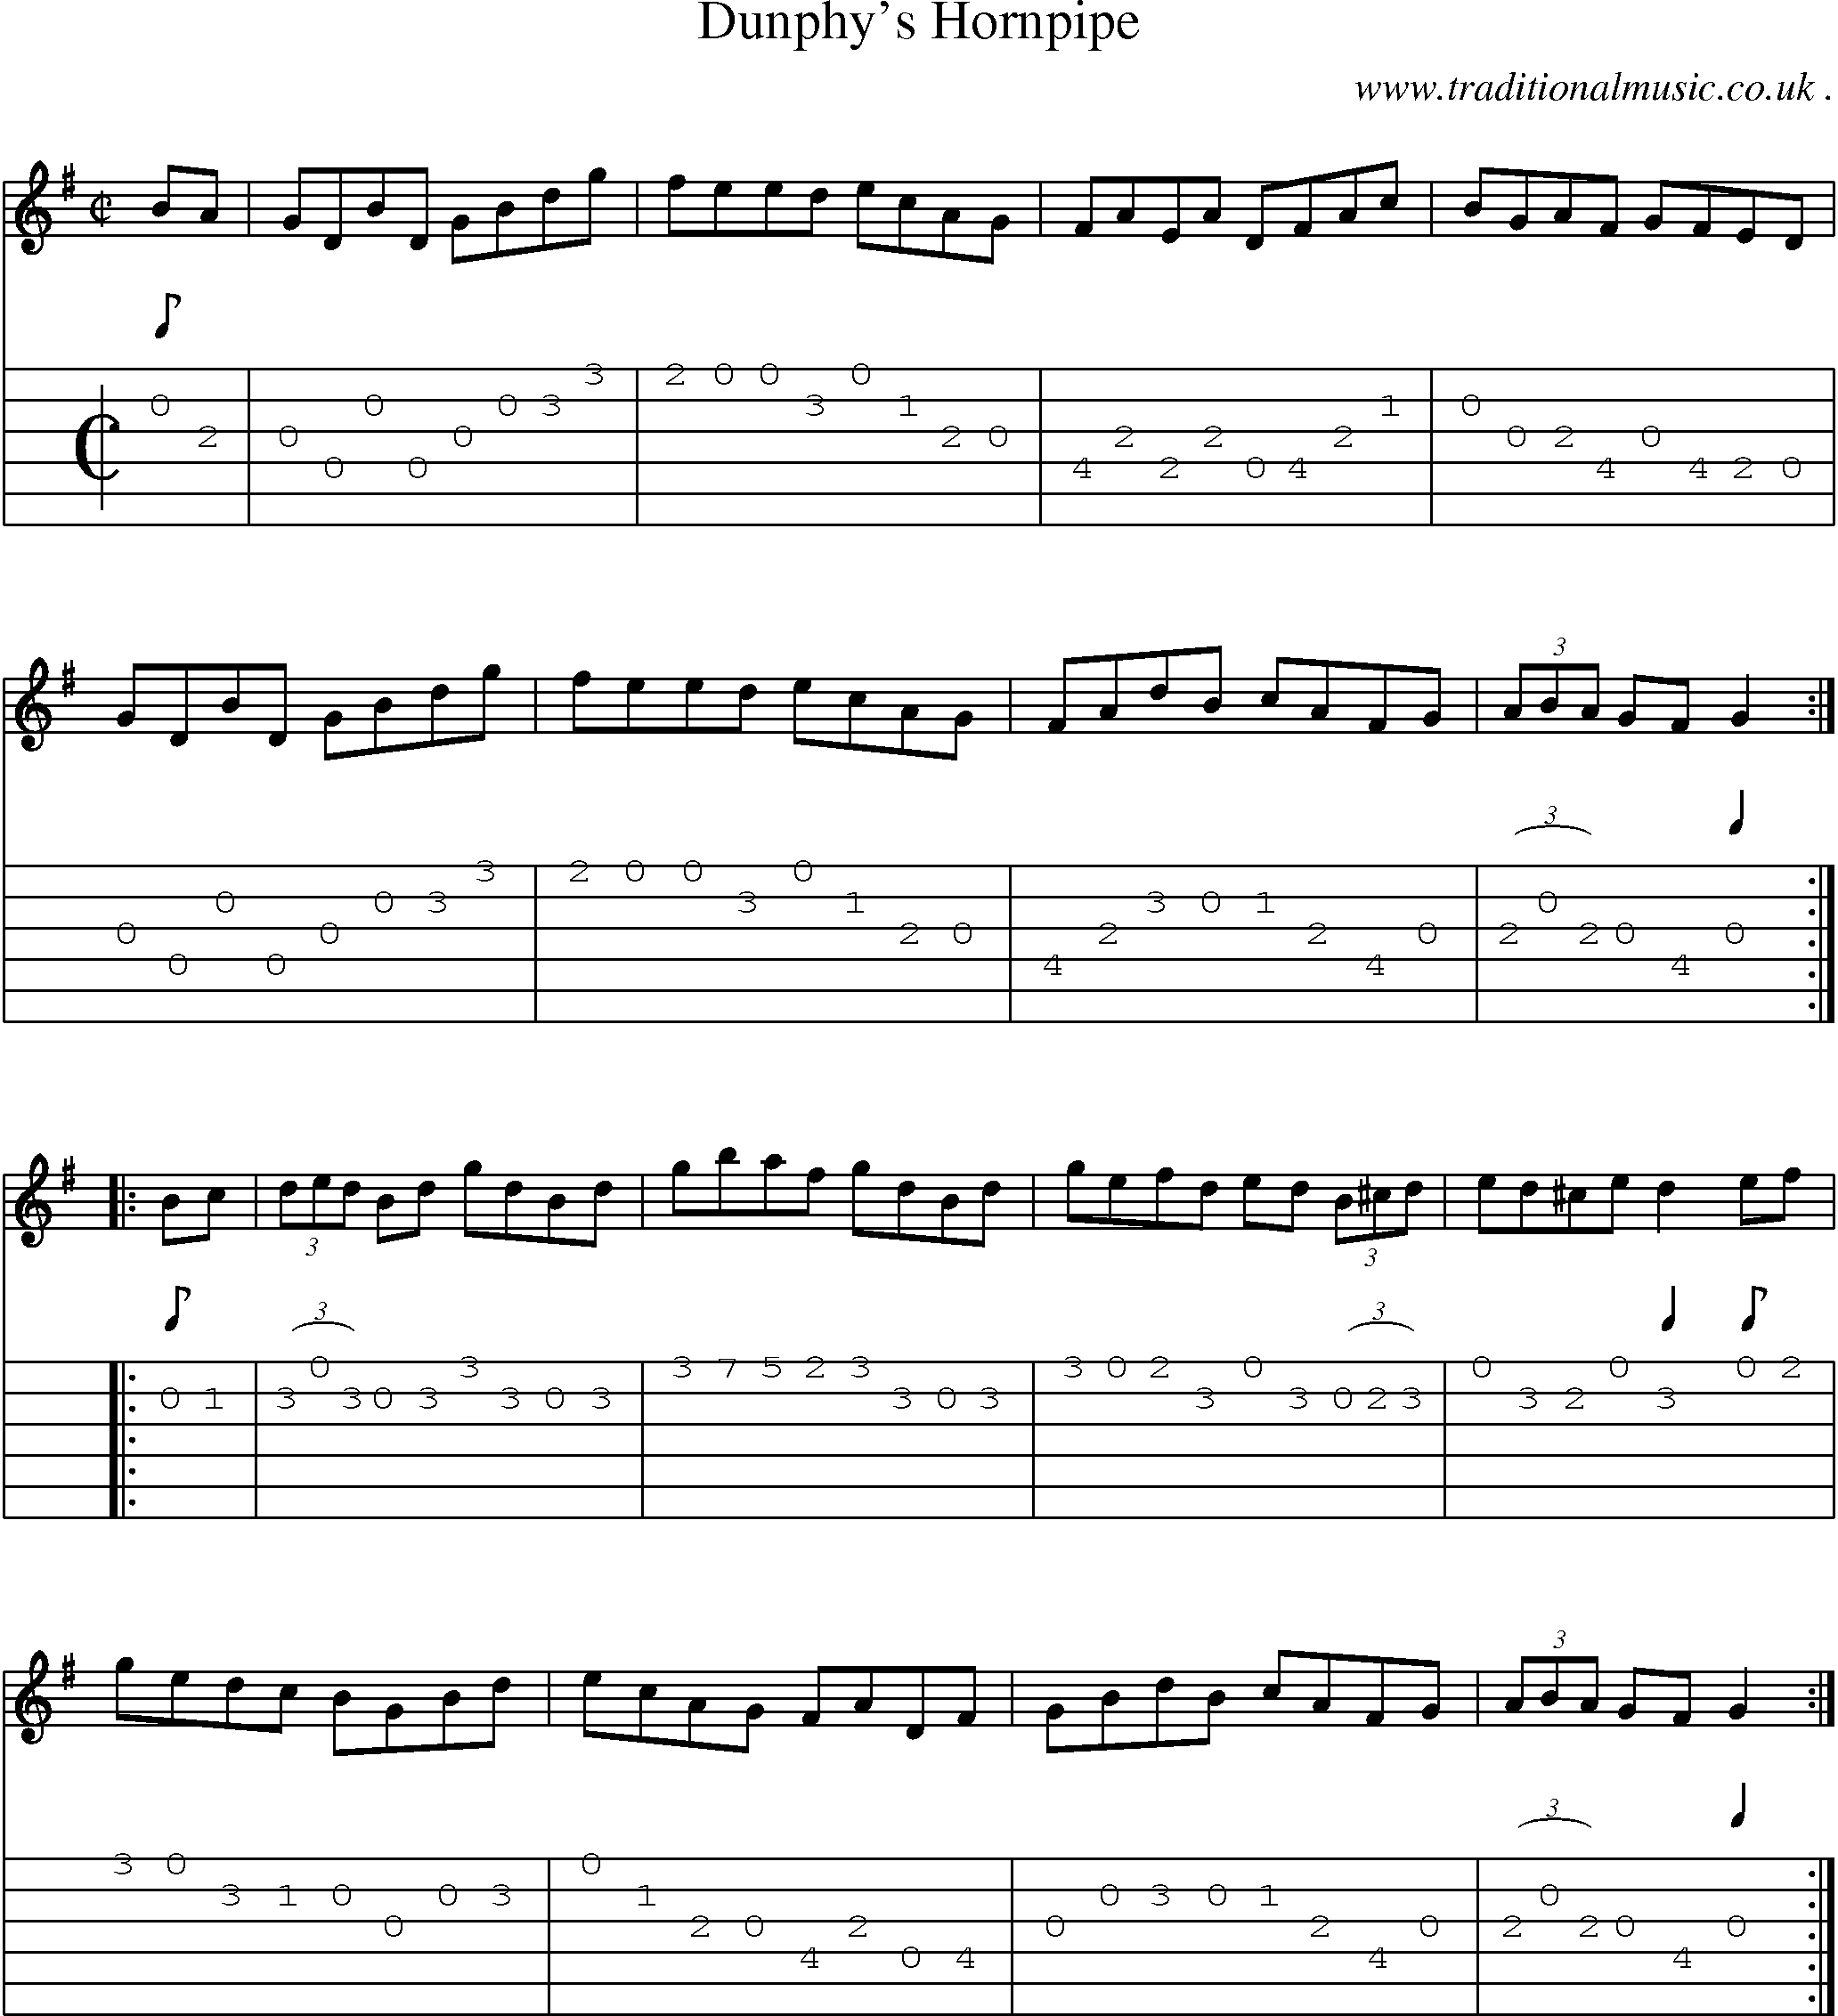 Sheet-Music and Guitar Tabs for Dunphys Hornpipe